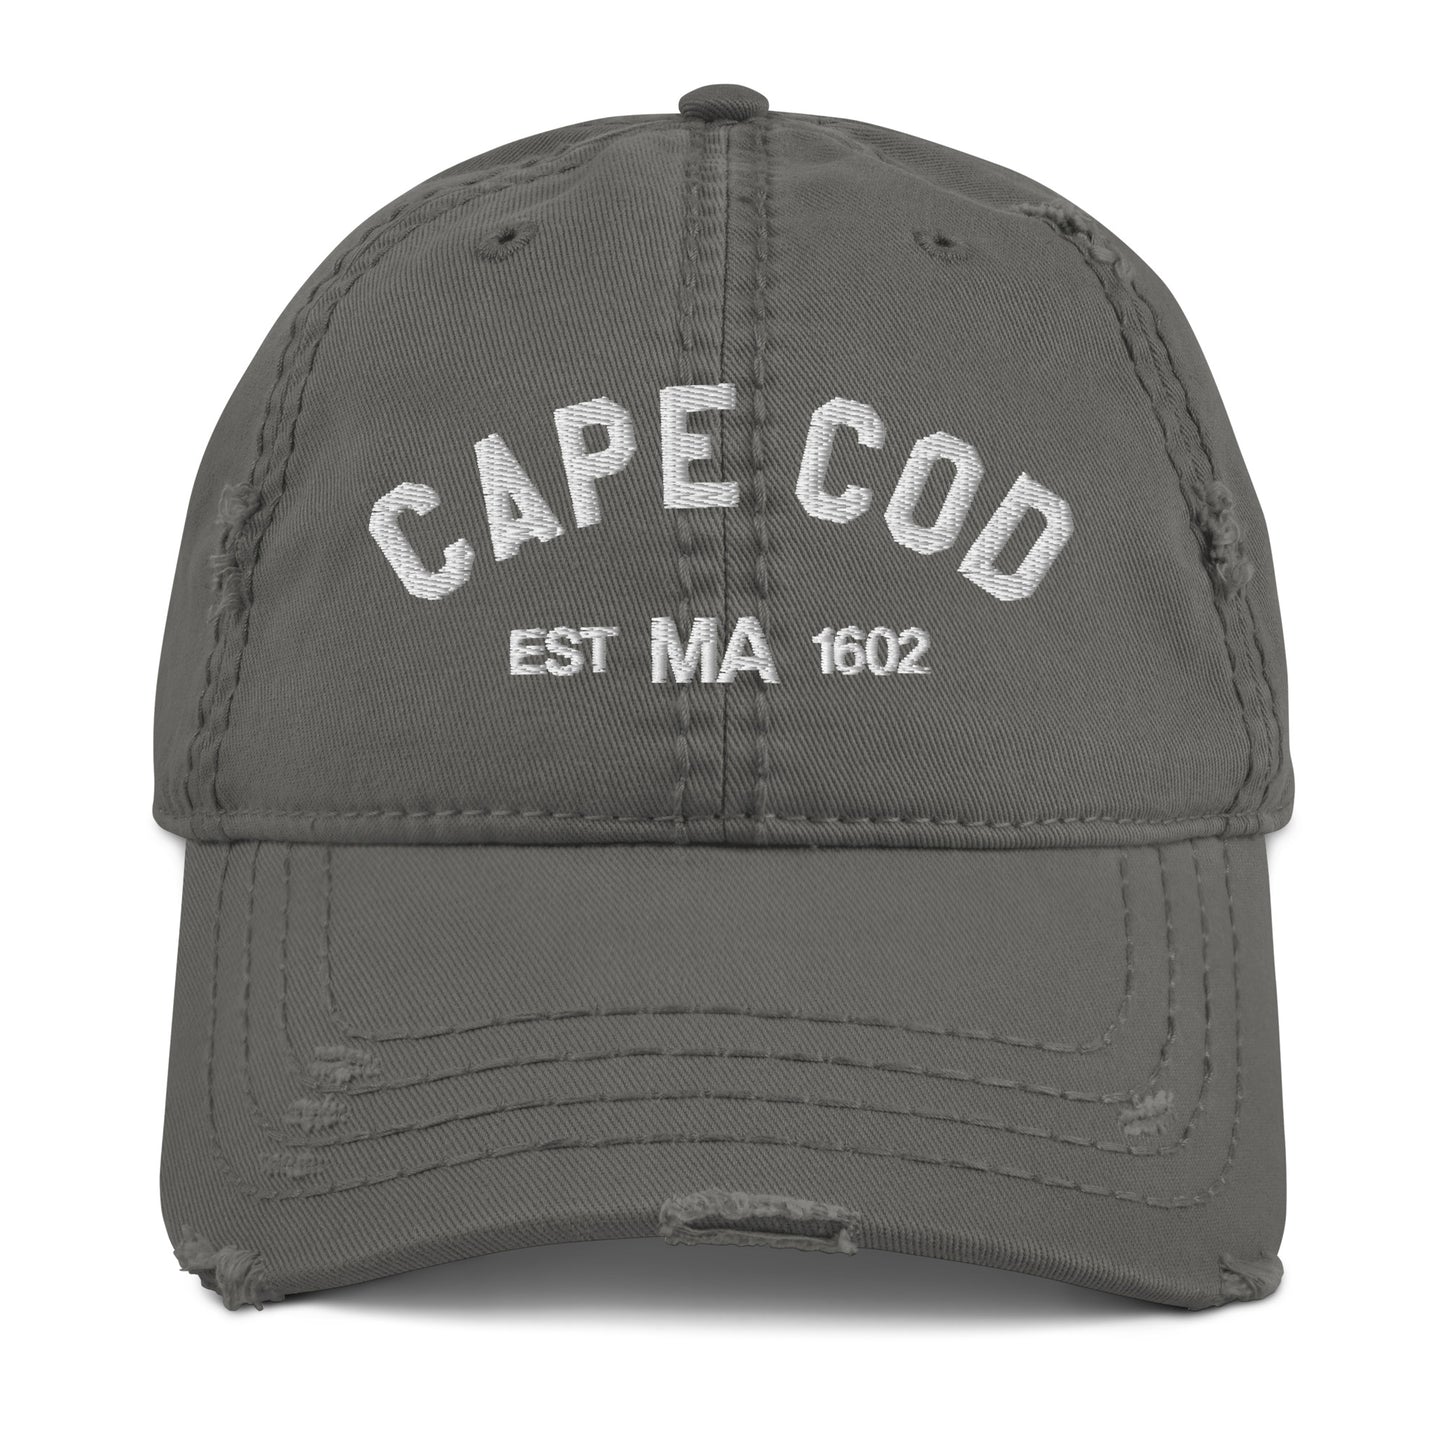 Cape Cod Baseball Hat Cap, MA Massachusetts Distressed Dad Mom Trucker Men Women Embroidery Embroidered Beach Boating Hat Starcove Fashion